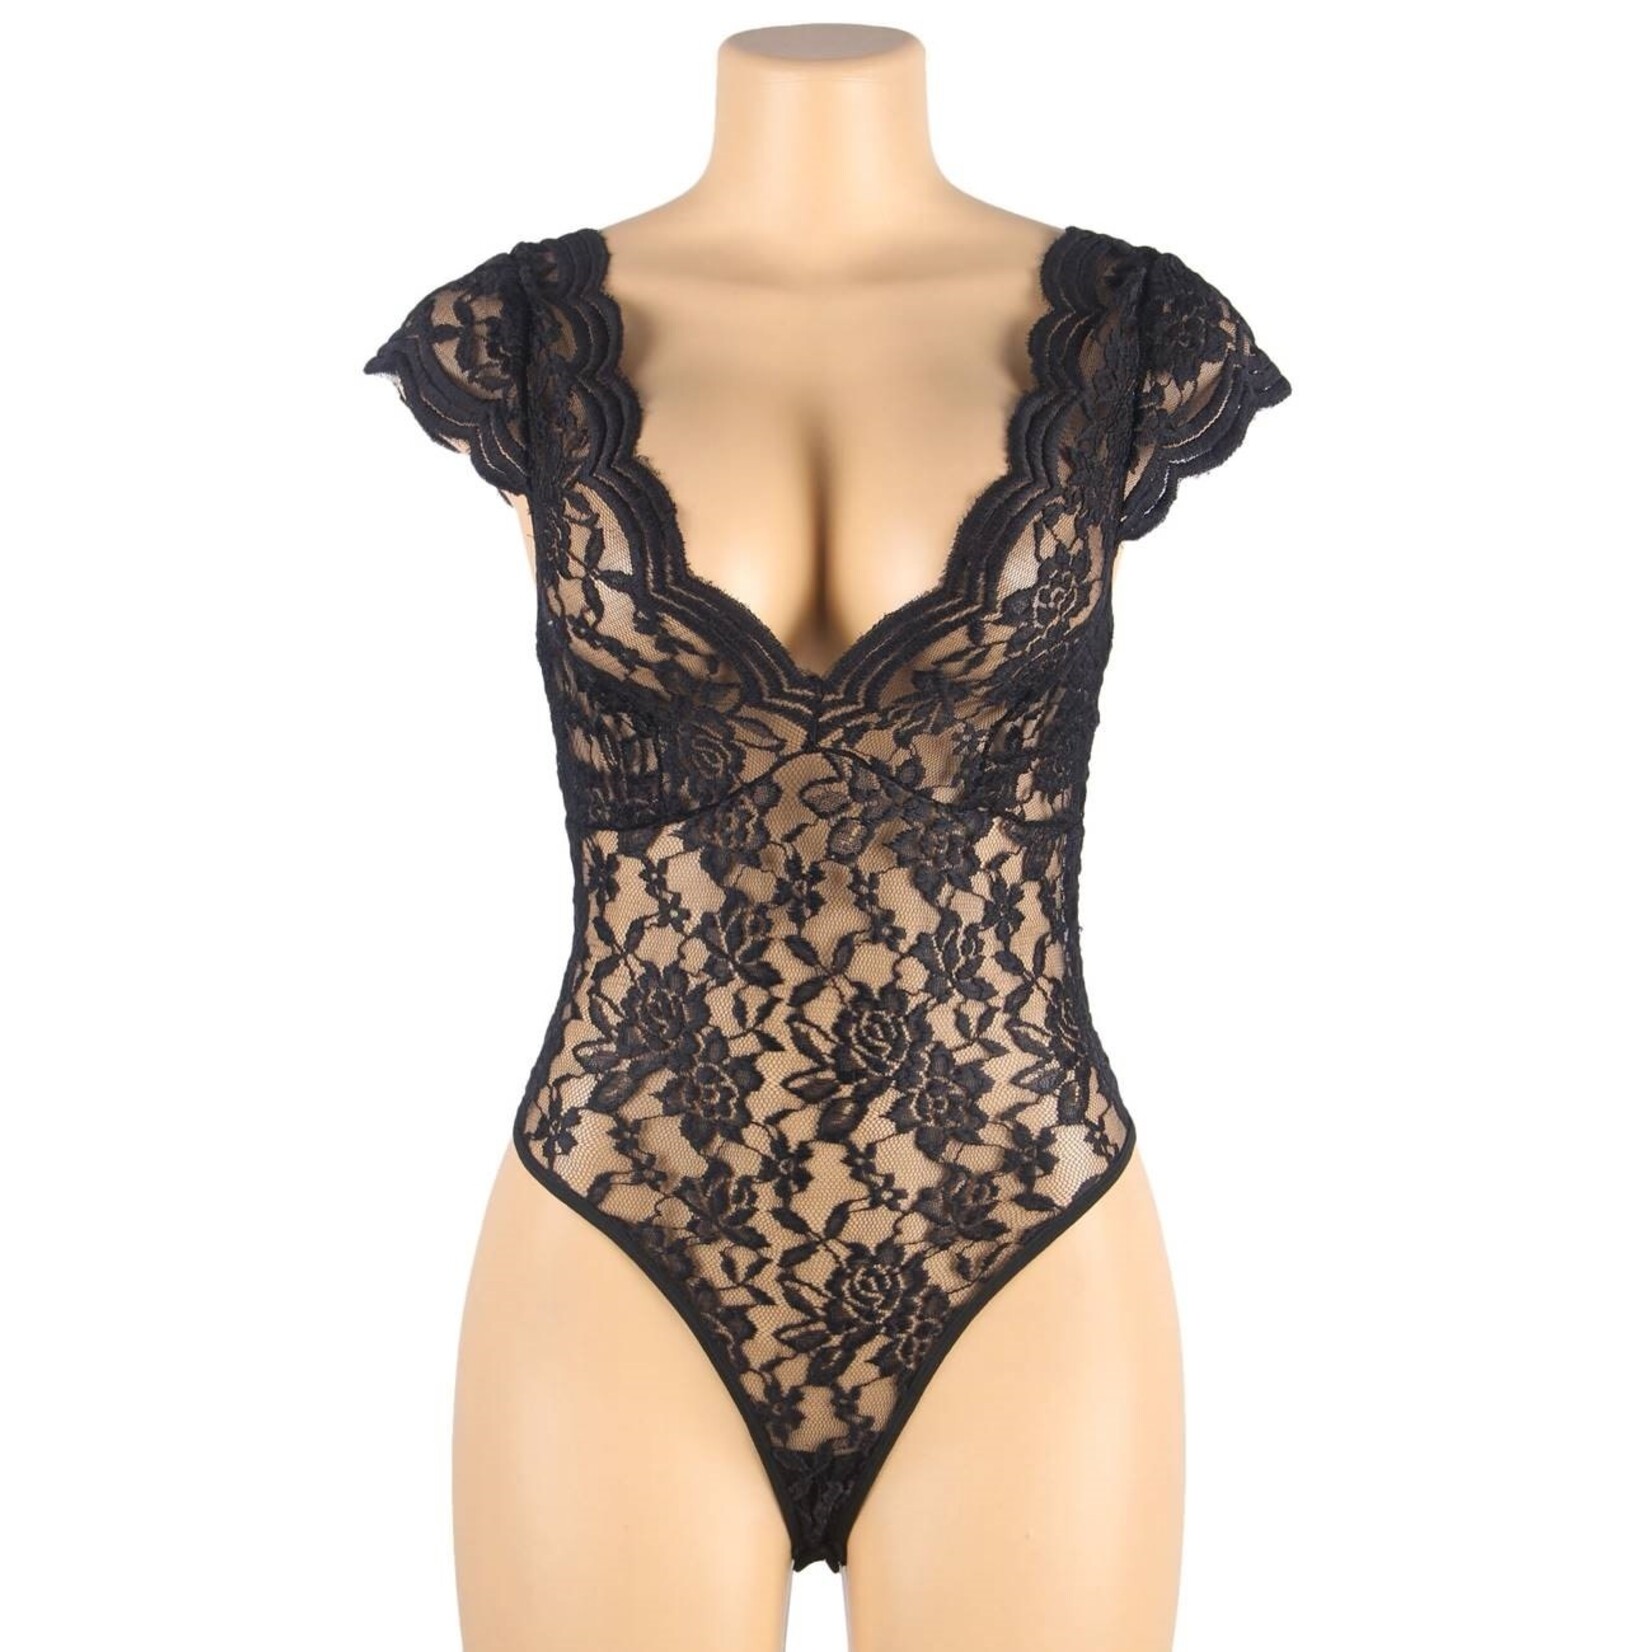 OH YEAH! -  SEXY BLACK DEEP V BACKLESS FULL LACE TEDDY XS-S